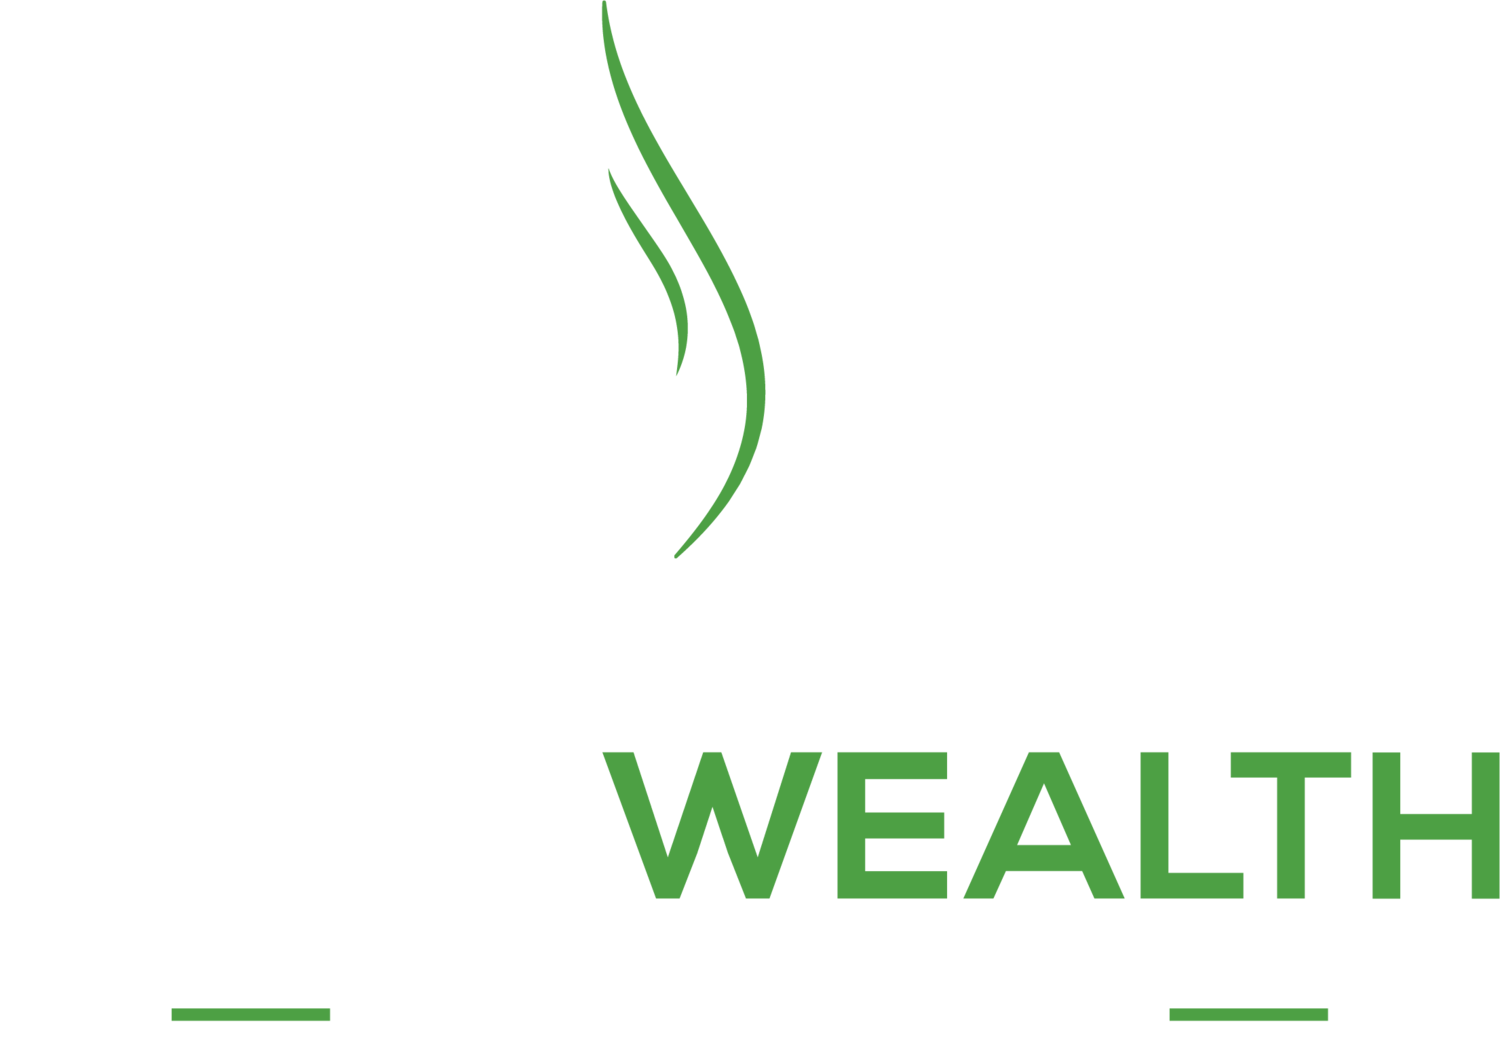 Java Wealth Planning: Certified Financial Planner for Tech Professionals